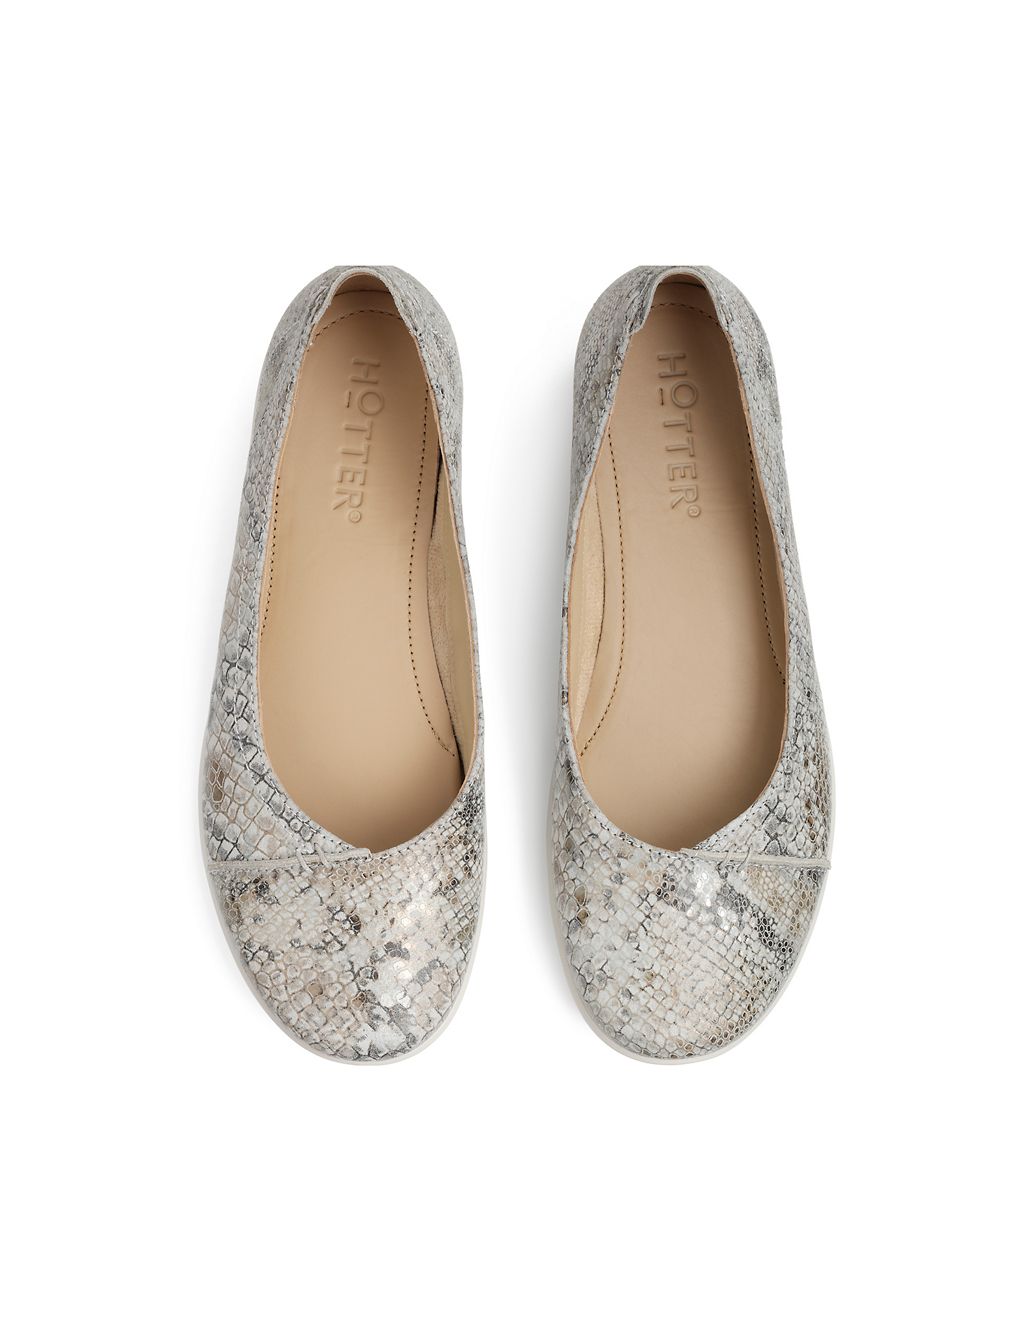 Robyn Leather Animal Print Ballet Pumps | Hotter | M&S